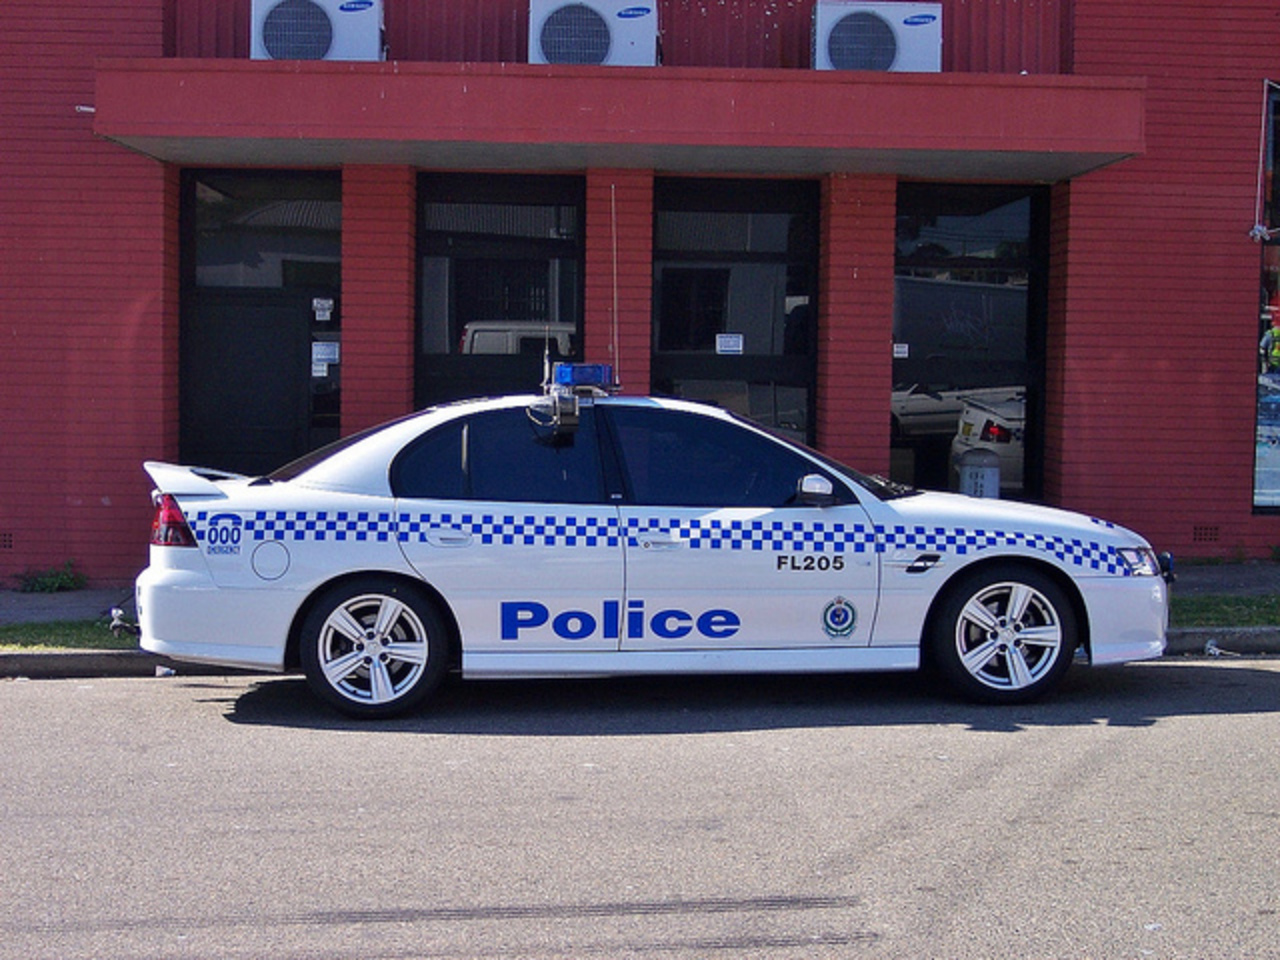 2004 Holden VZ Commodore SS - NSW Police | Flickr - Photo Sharing!